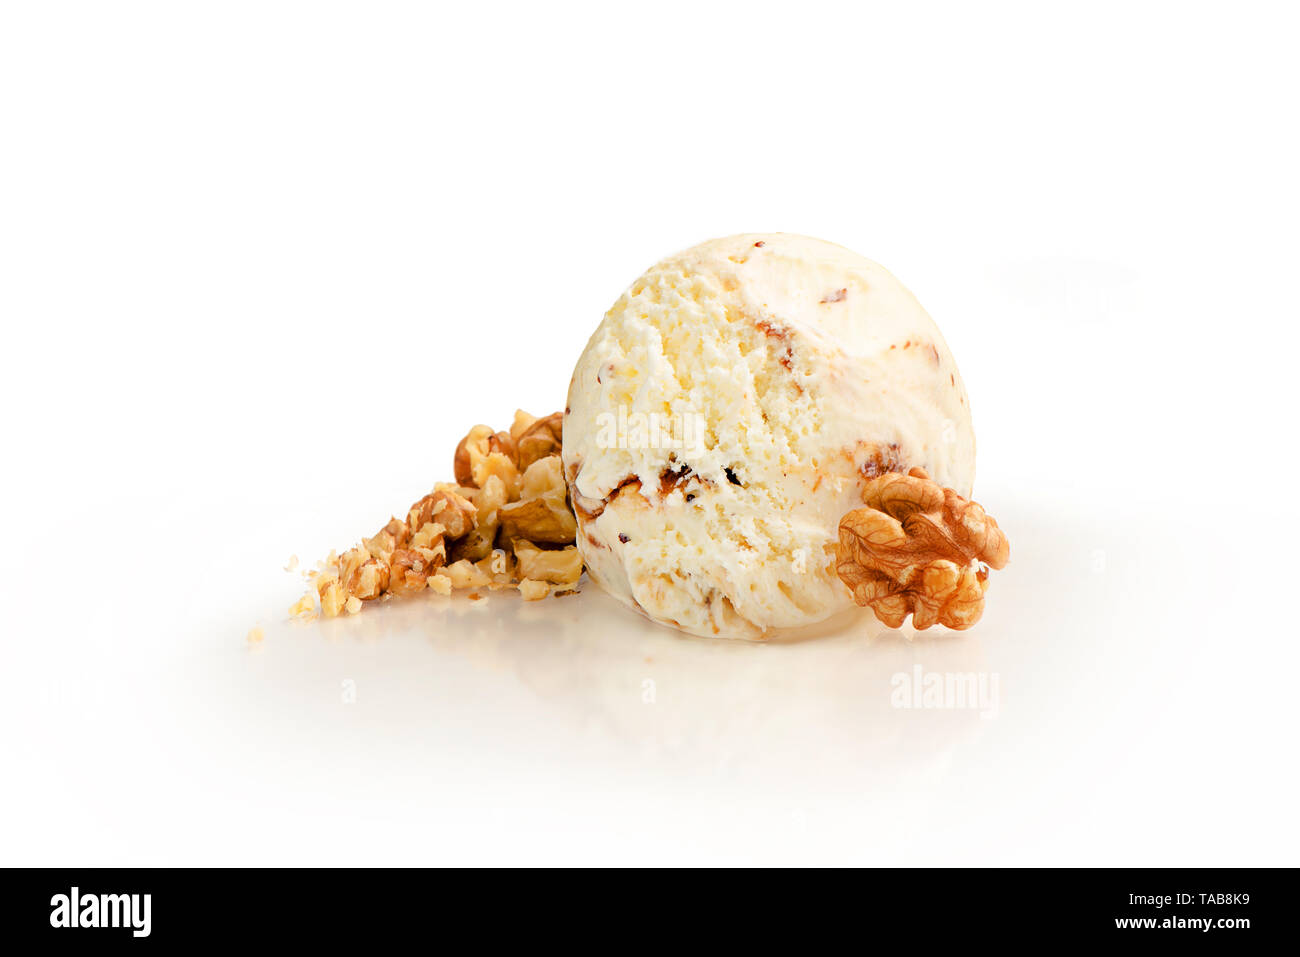 Ice cream ball, walnut and vanilla flavor with ingredients, isolated on a white background. Stock Photo